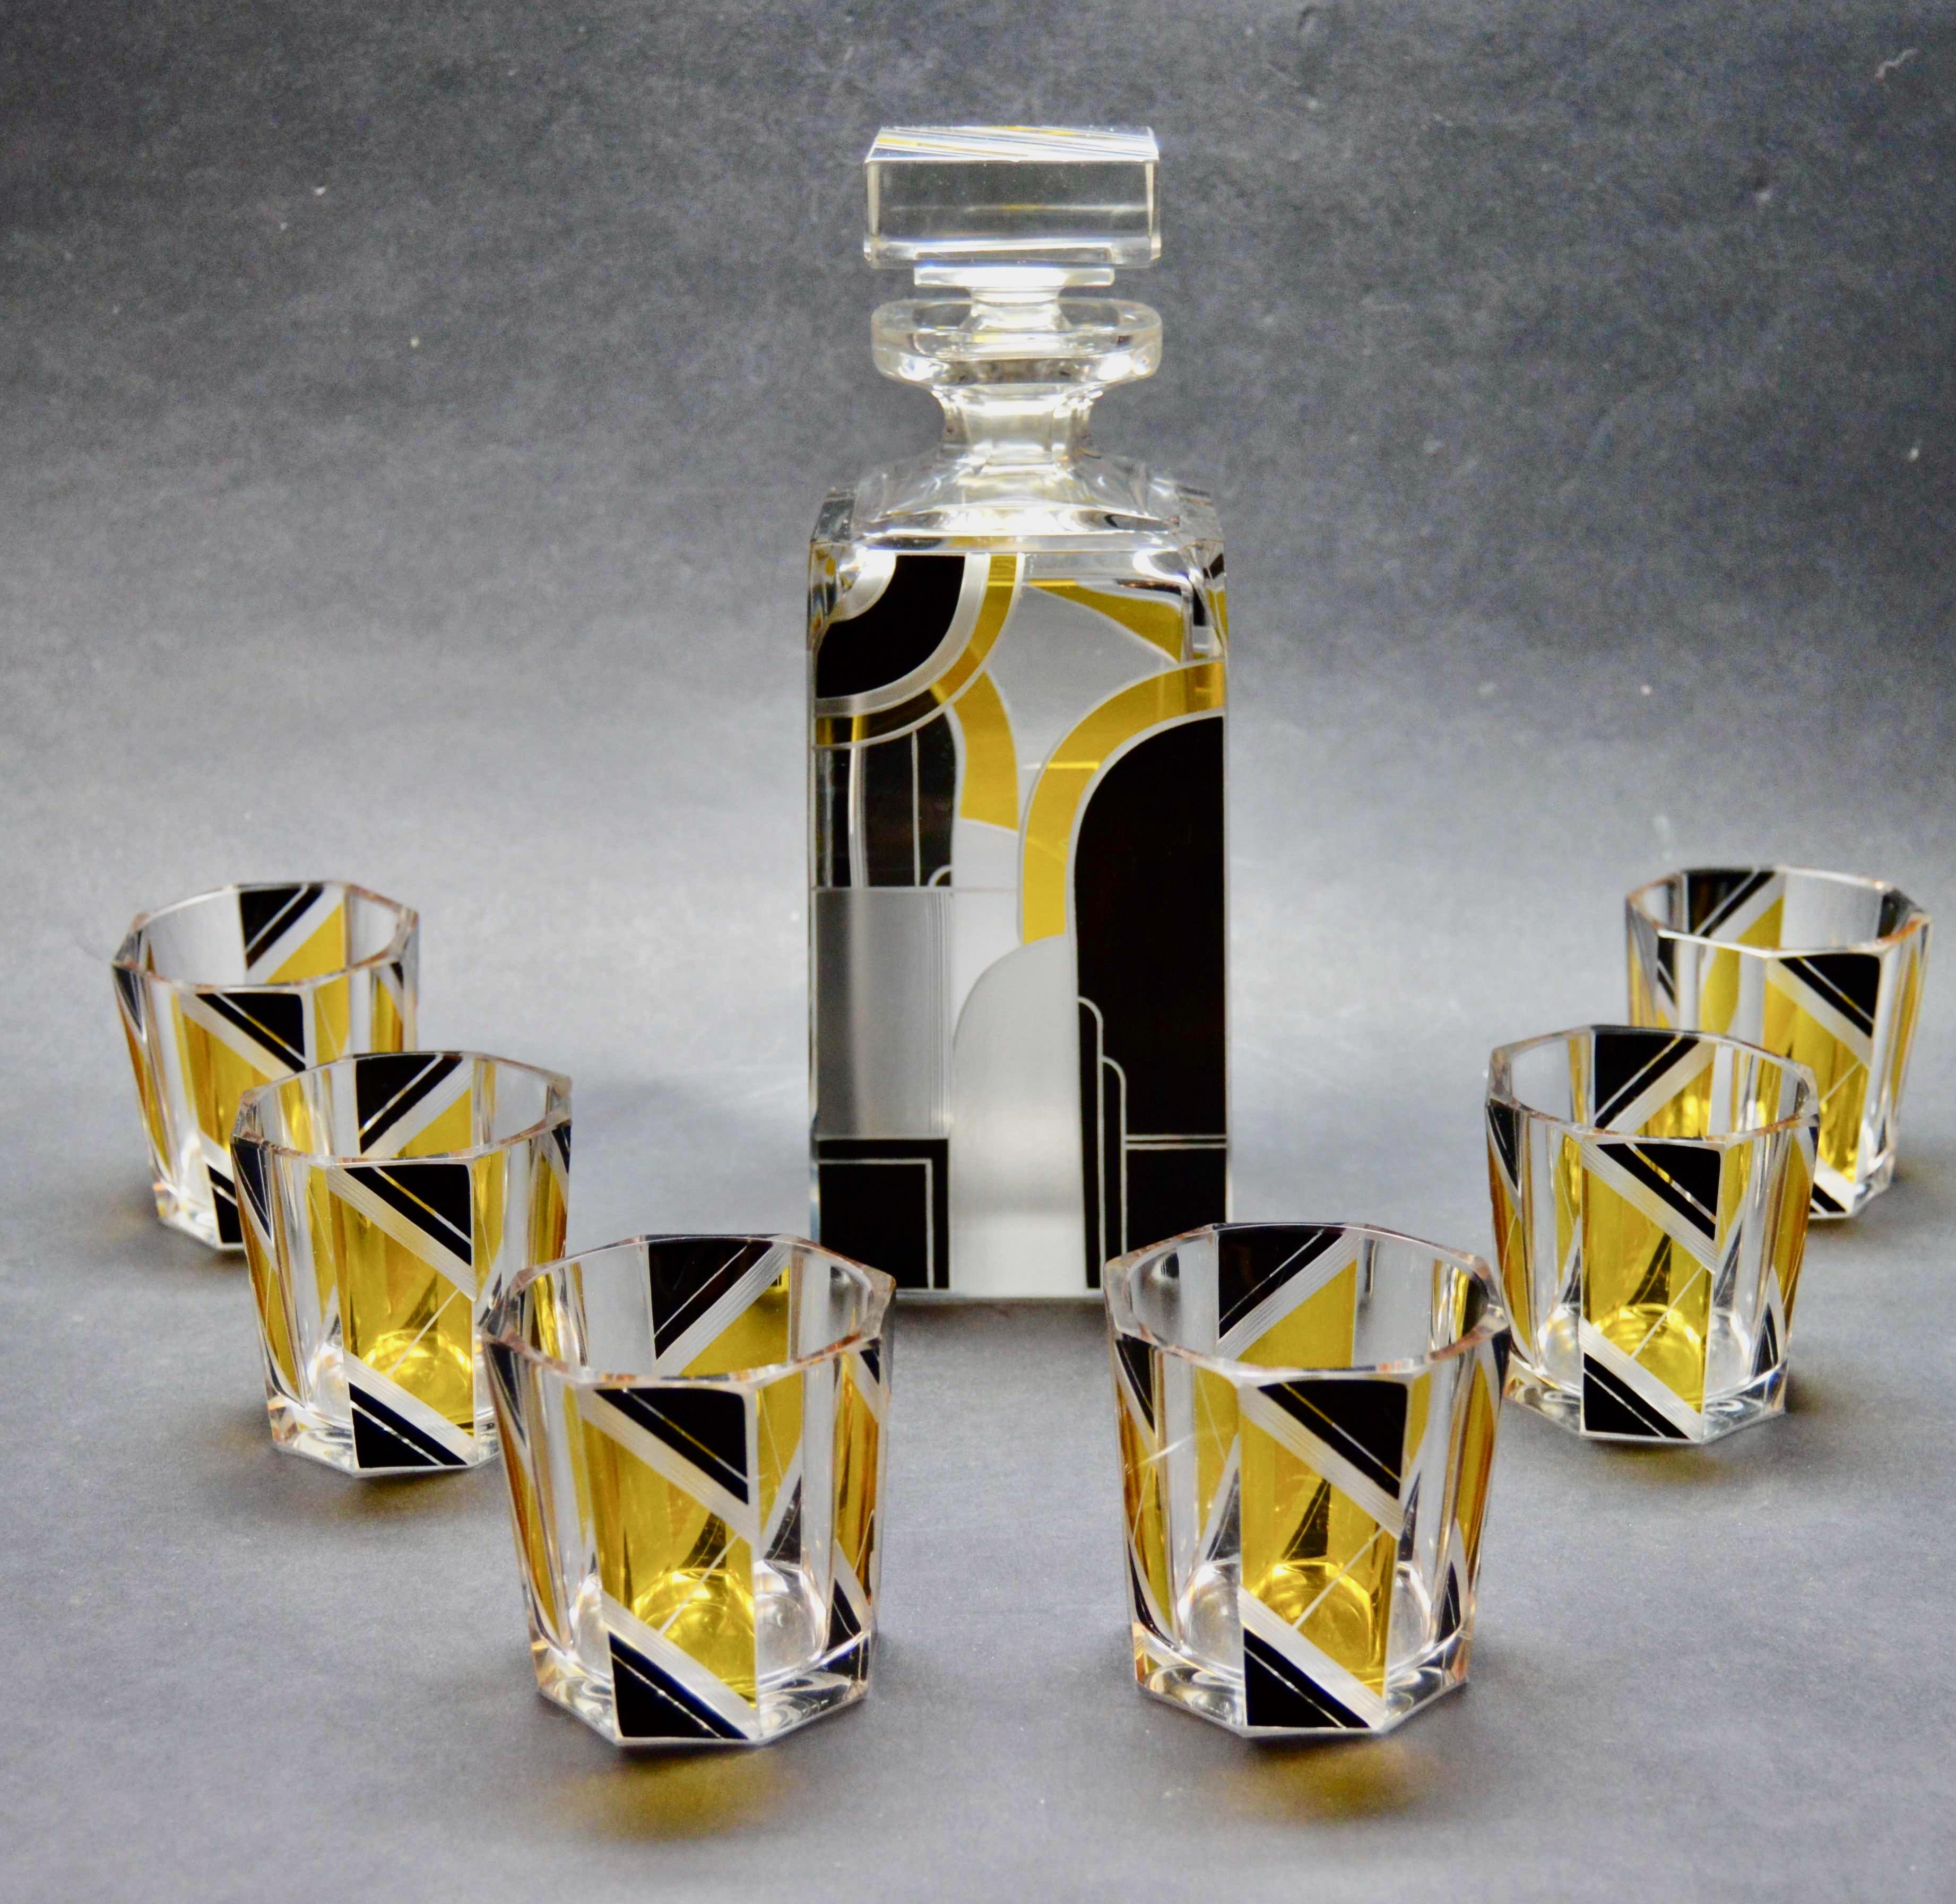 Karl Palda’s decanter and glasses are some of the finest pieces we’ve ever offered. While all of his designs from the Art Deco era in Czechoslovakia are remarkable, this set is particularly noteworthy for the size of the glasses. Unlike the typical